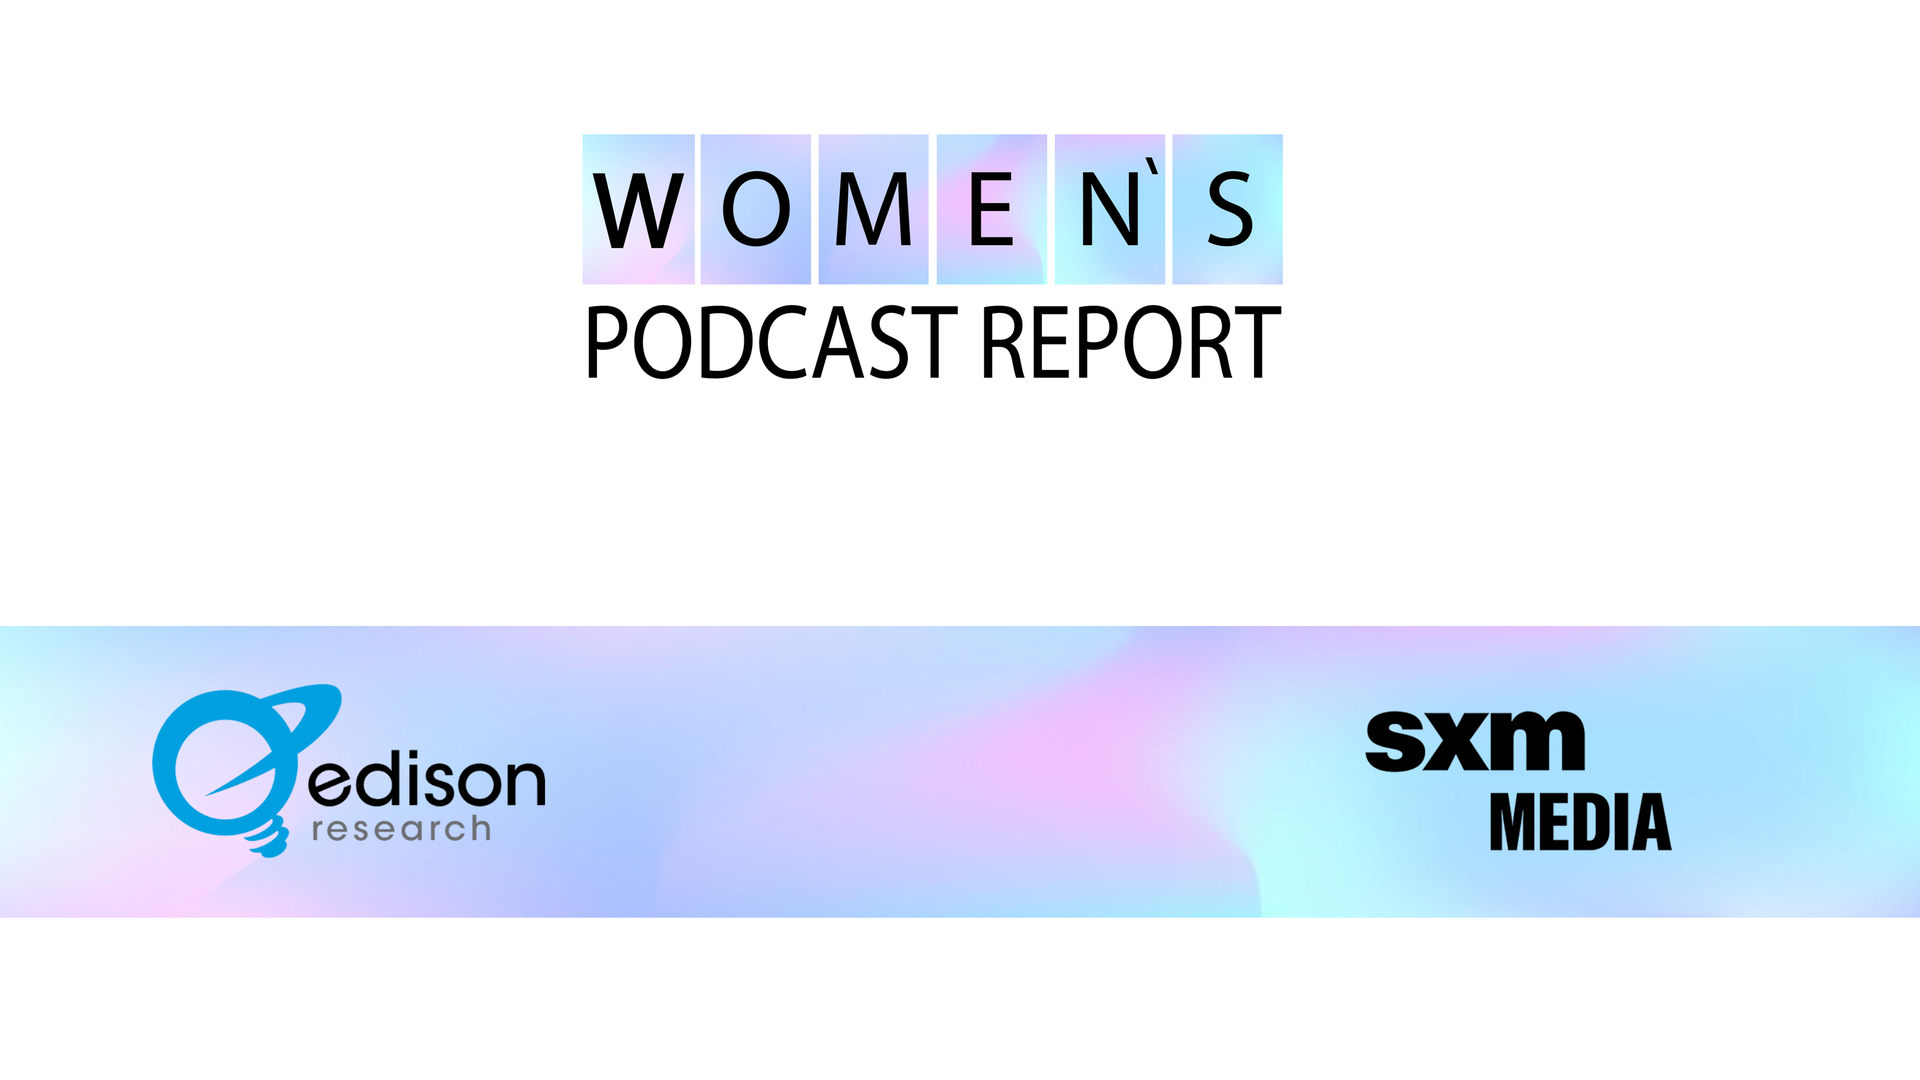 The Women's Podcast Report